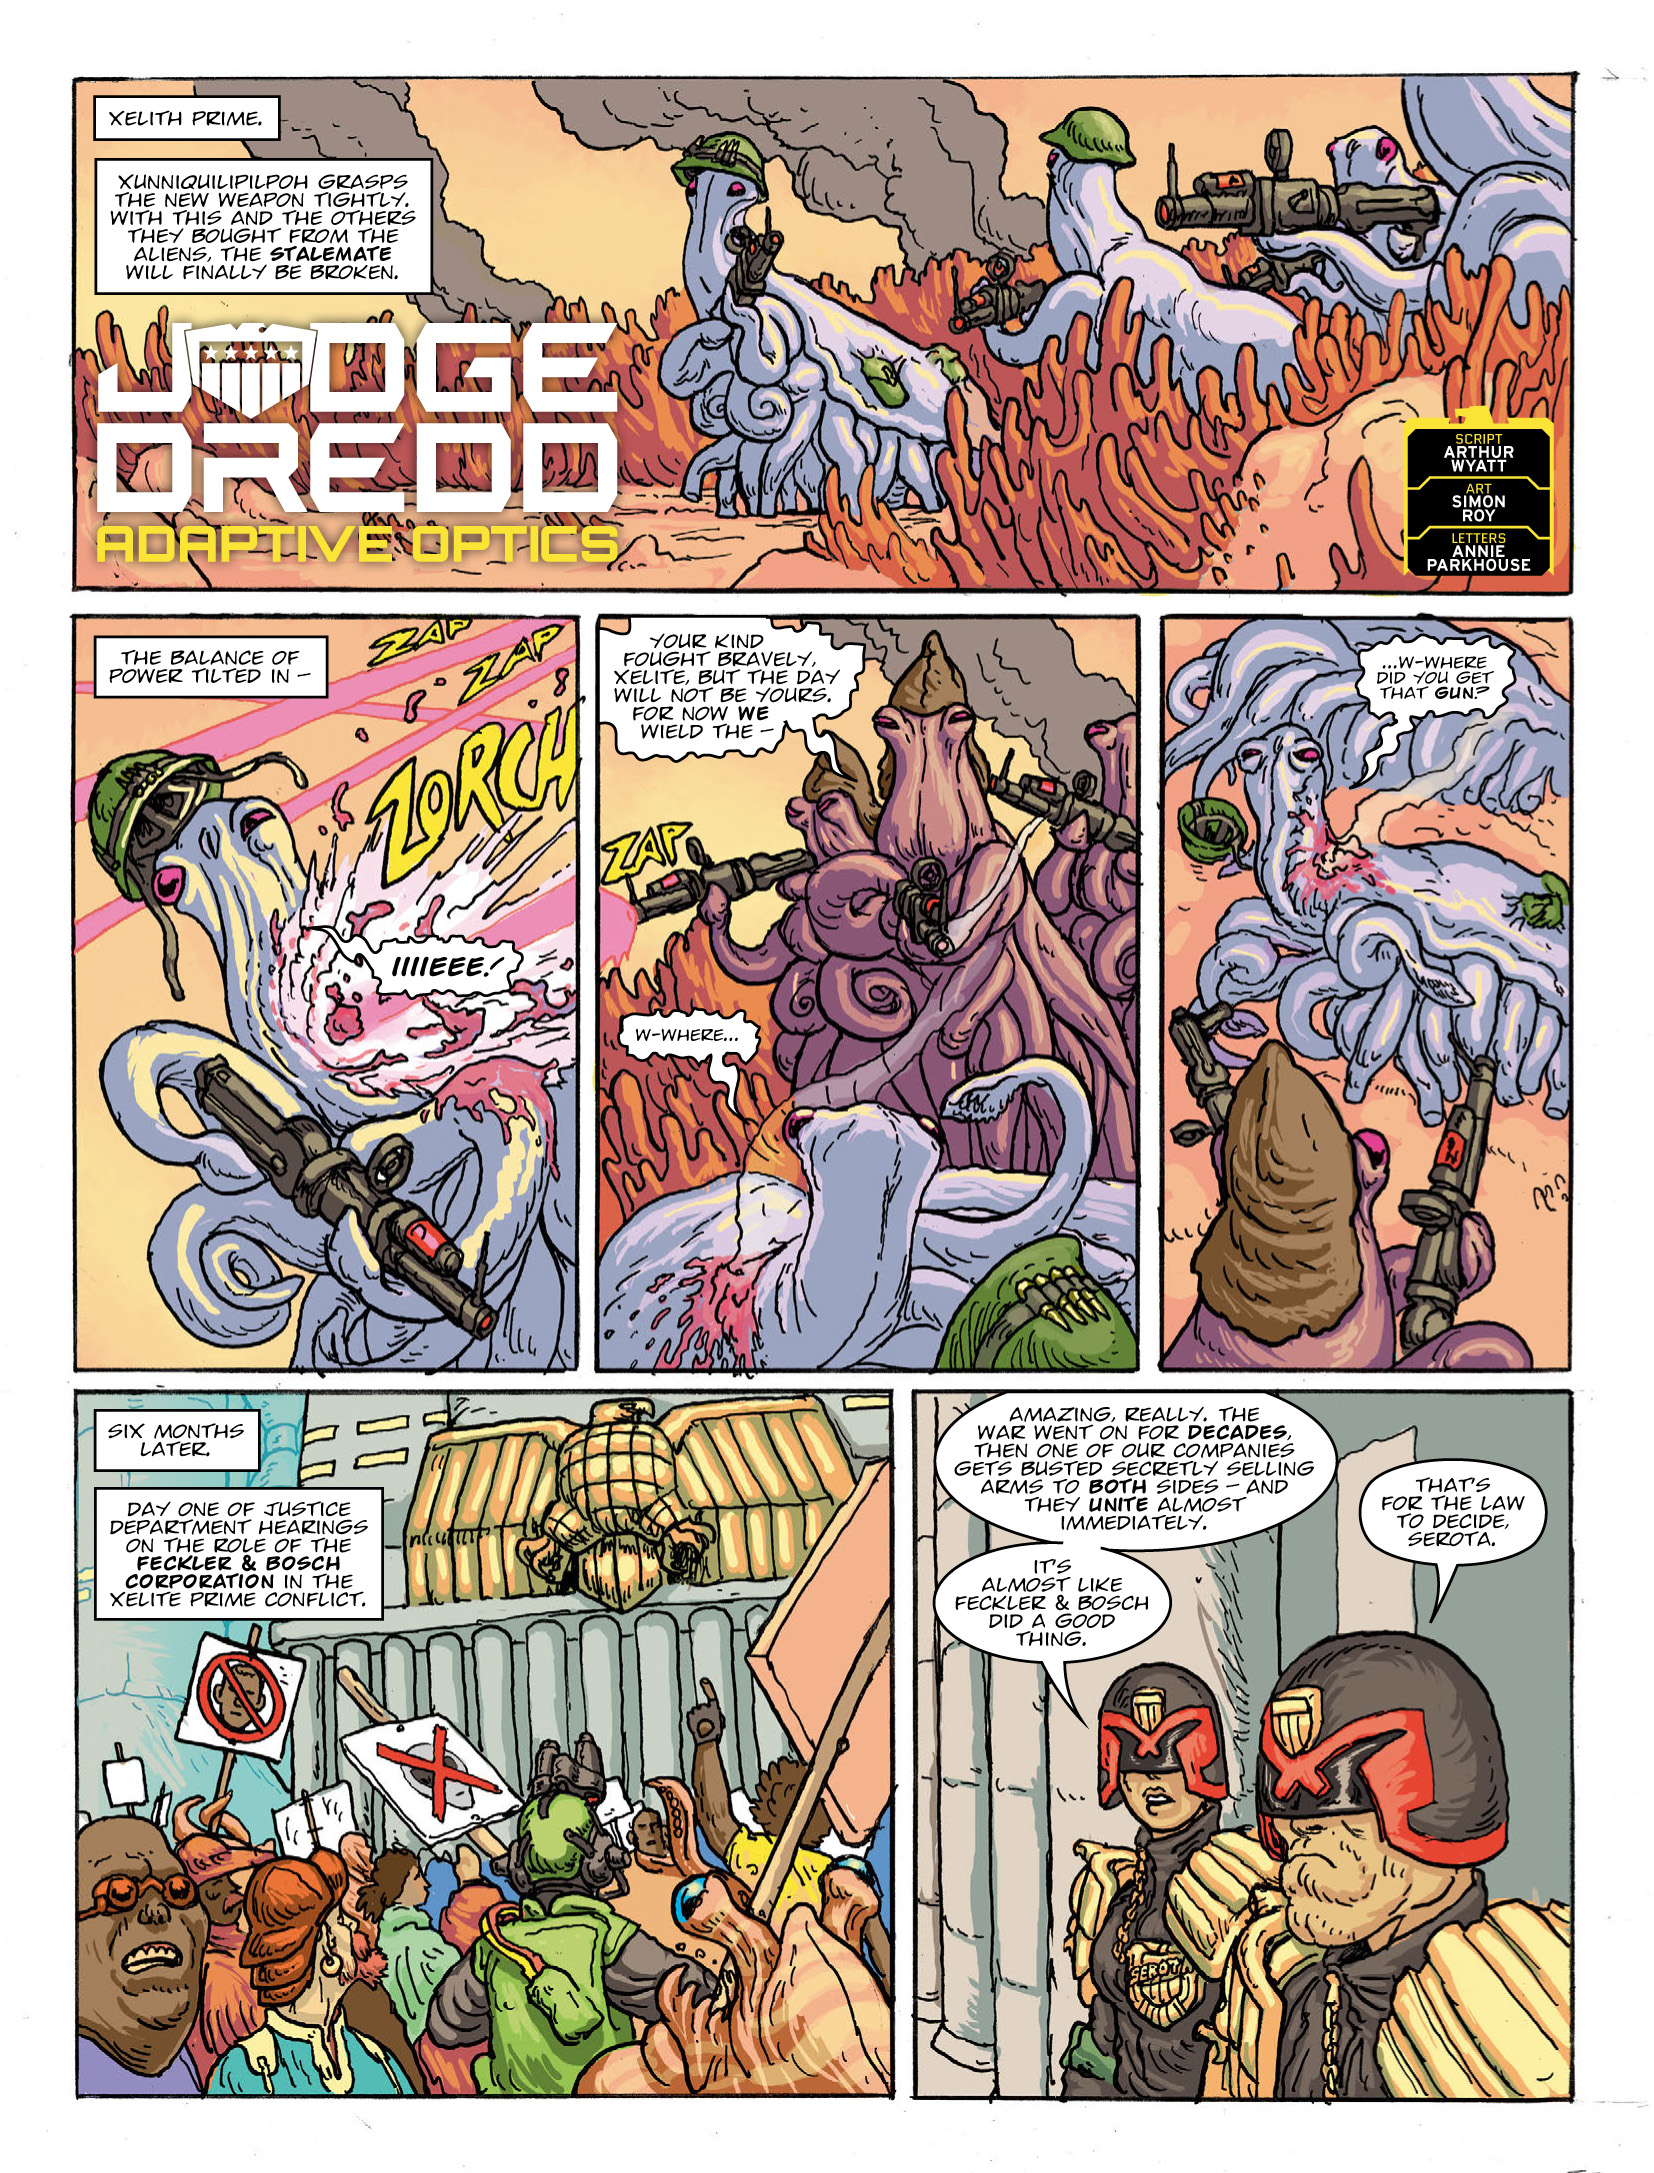 2000 AD: Chapter 2053 - Page 3